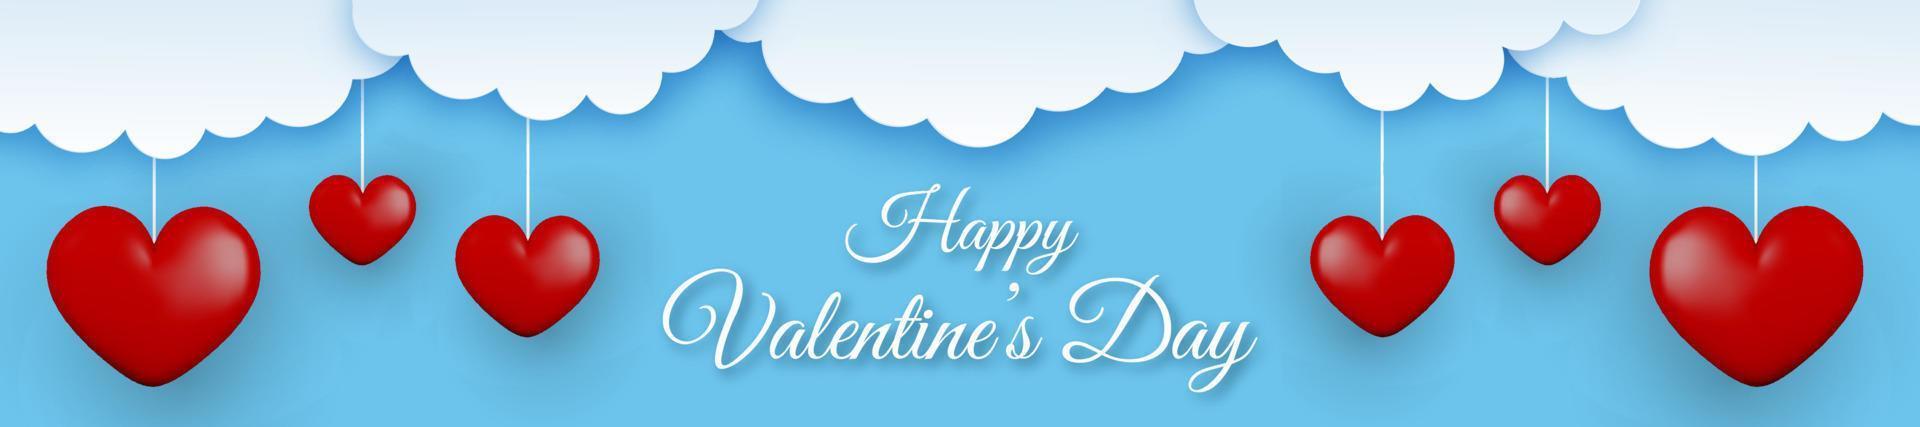 Happy Valentine's Day horizontal banner with clouds and red 3d hearts on a blue background. vector